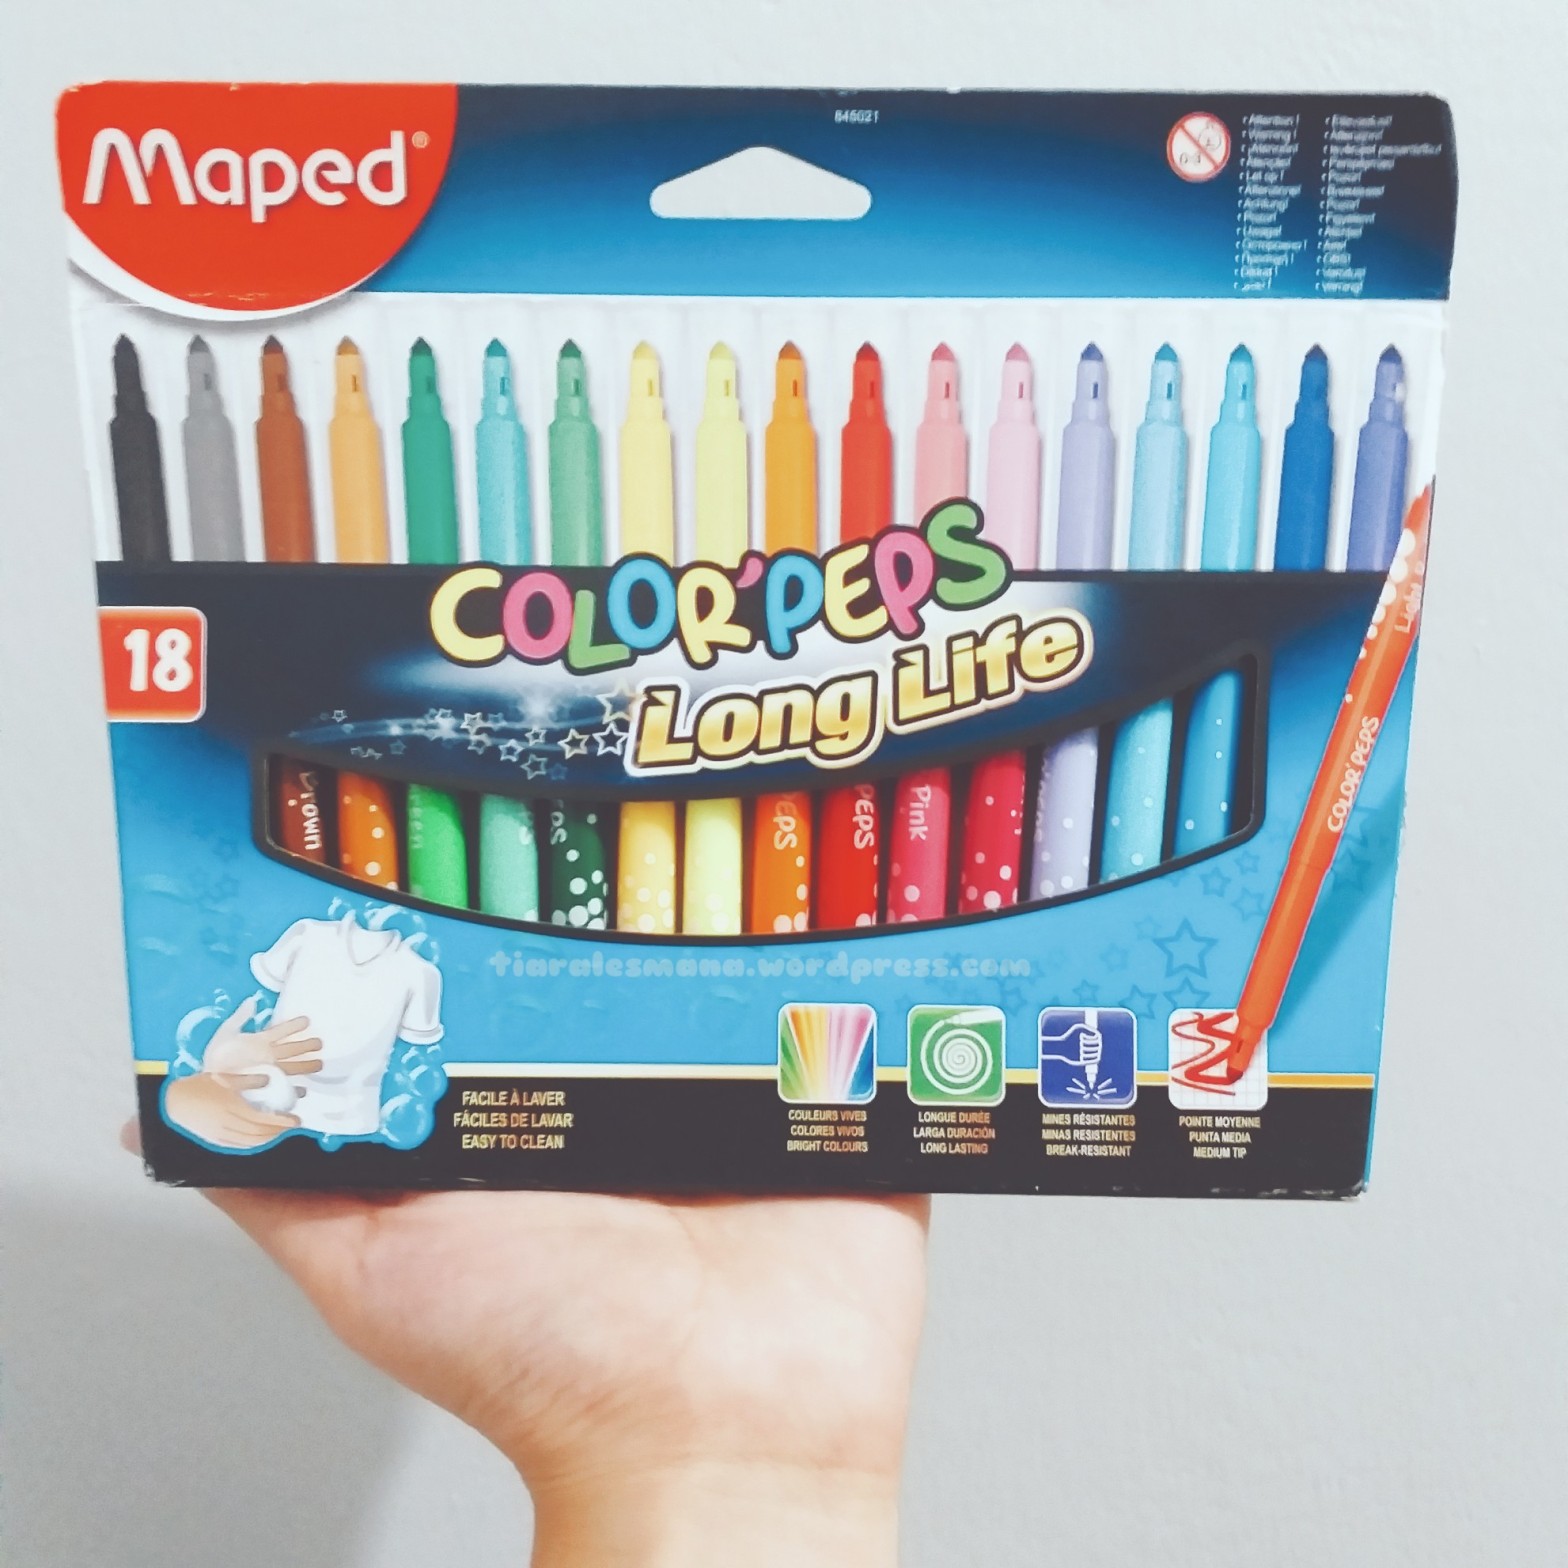 ProductReview: Maped Color'Peps Long Life for Hand Lettering, Yay